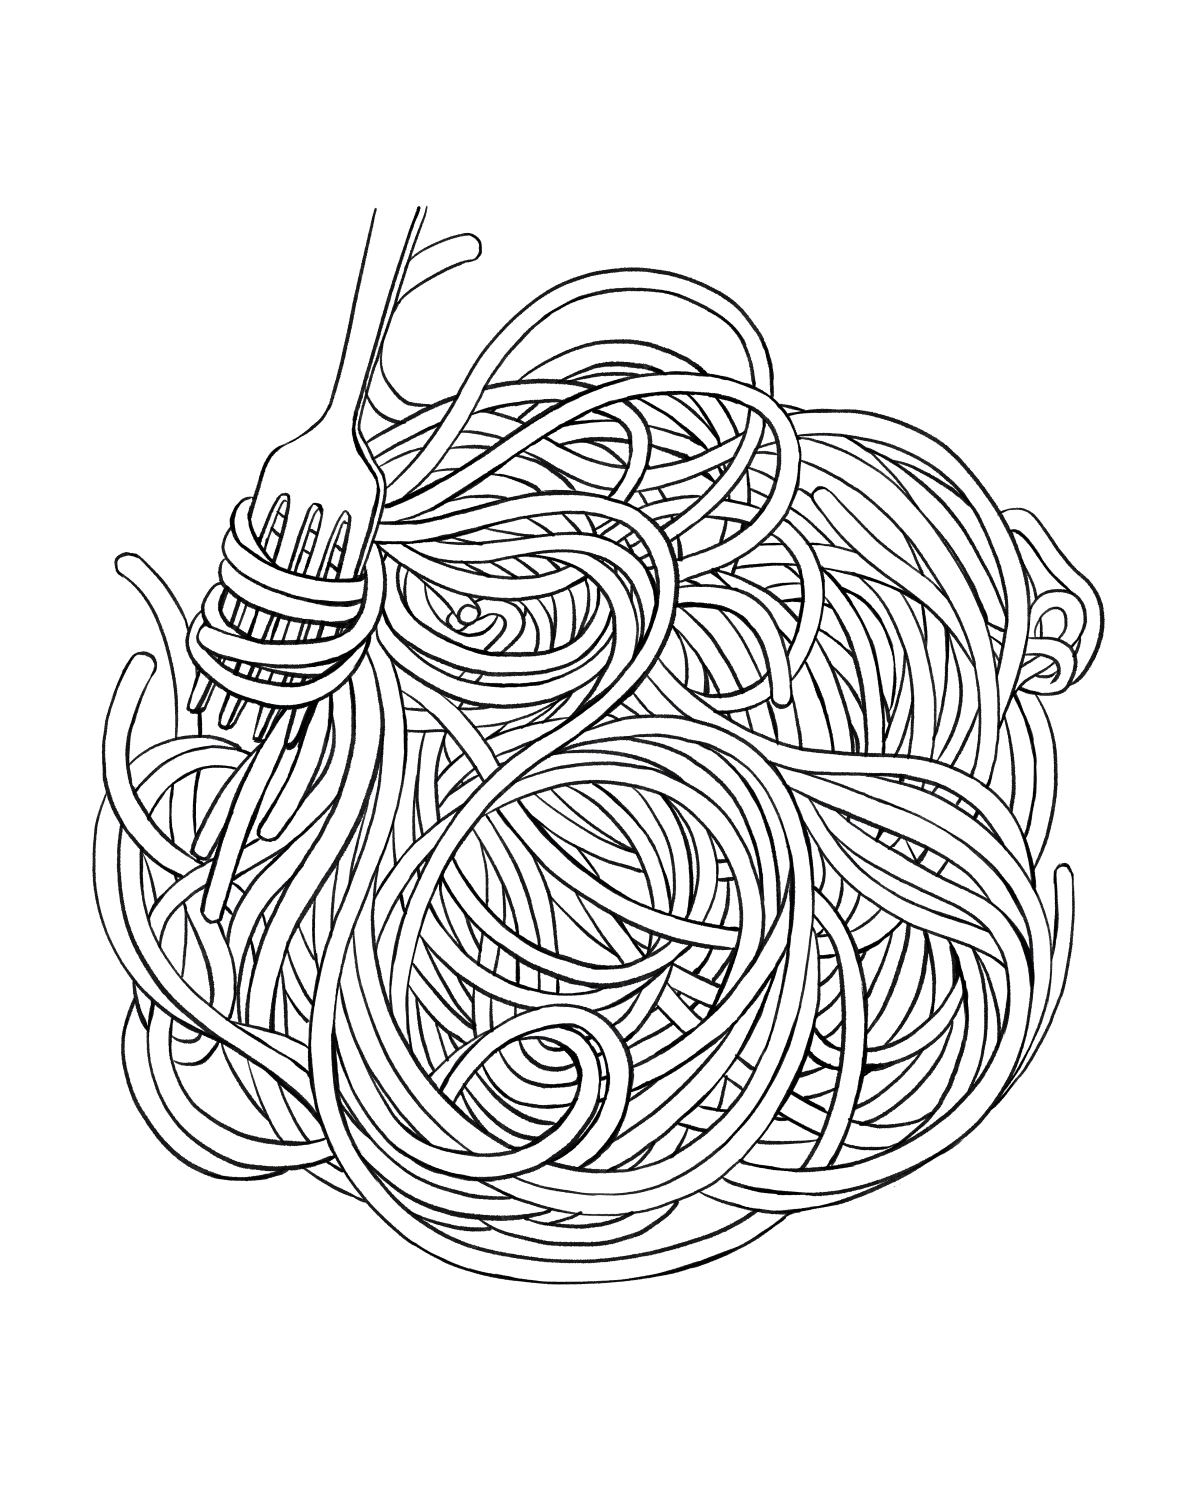 Oodles of Doodles of Noodles: Coloring e-book PDF sold by Robin Ha ART on  Storenvy